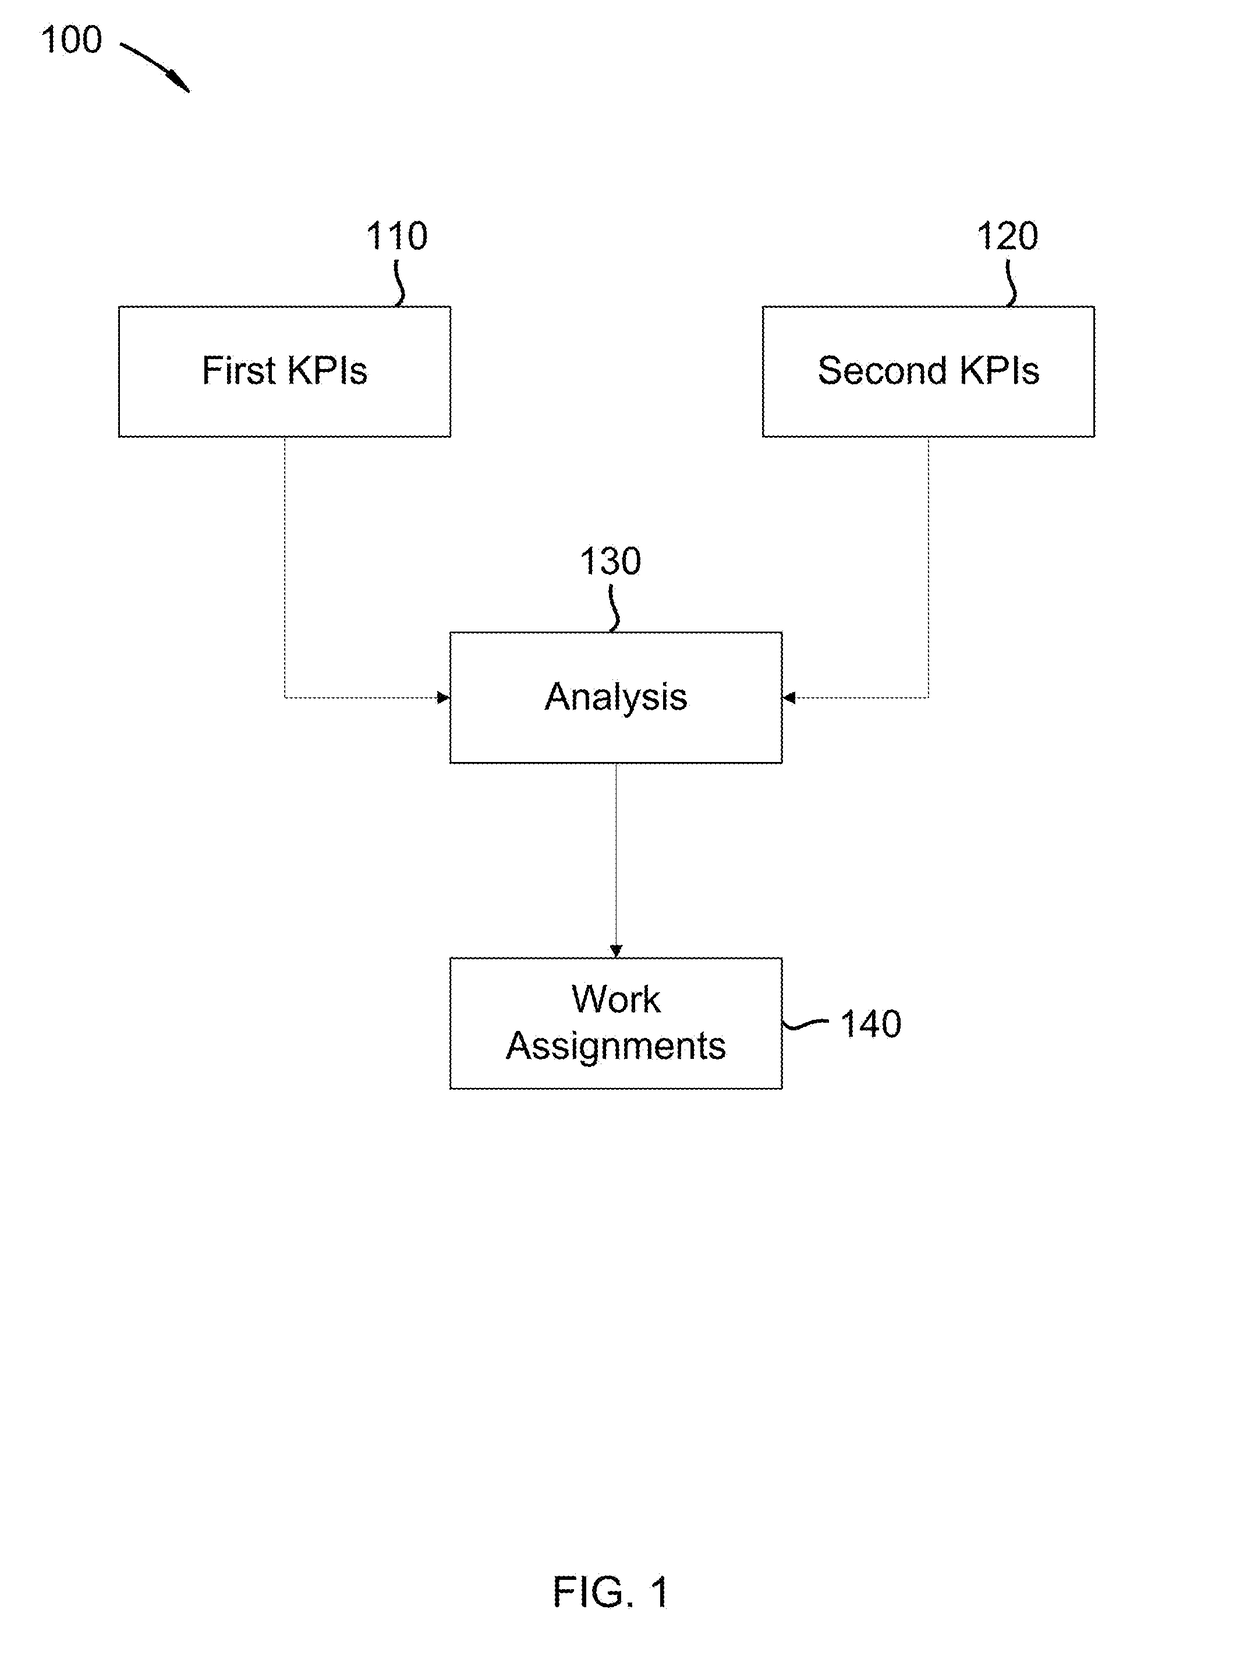 Method for Optimizing Employee Work Assignments